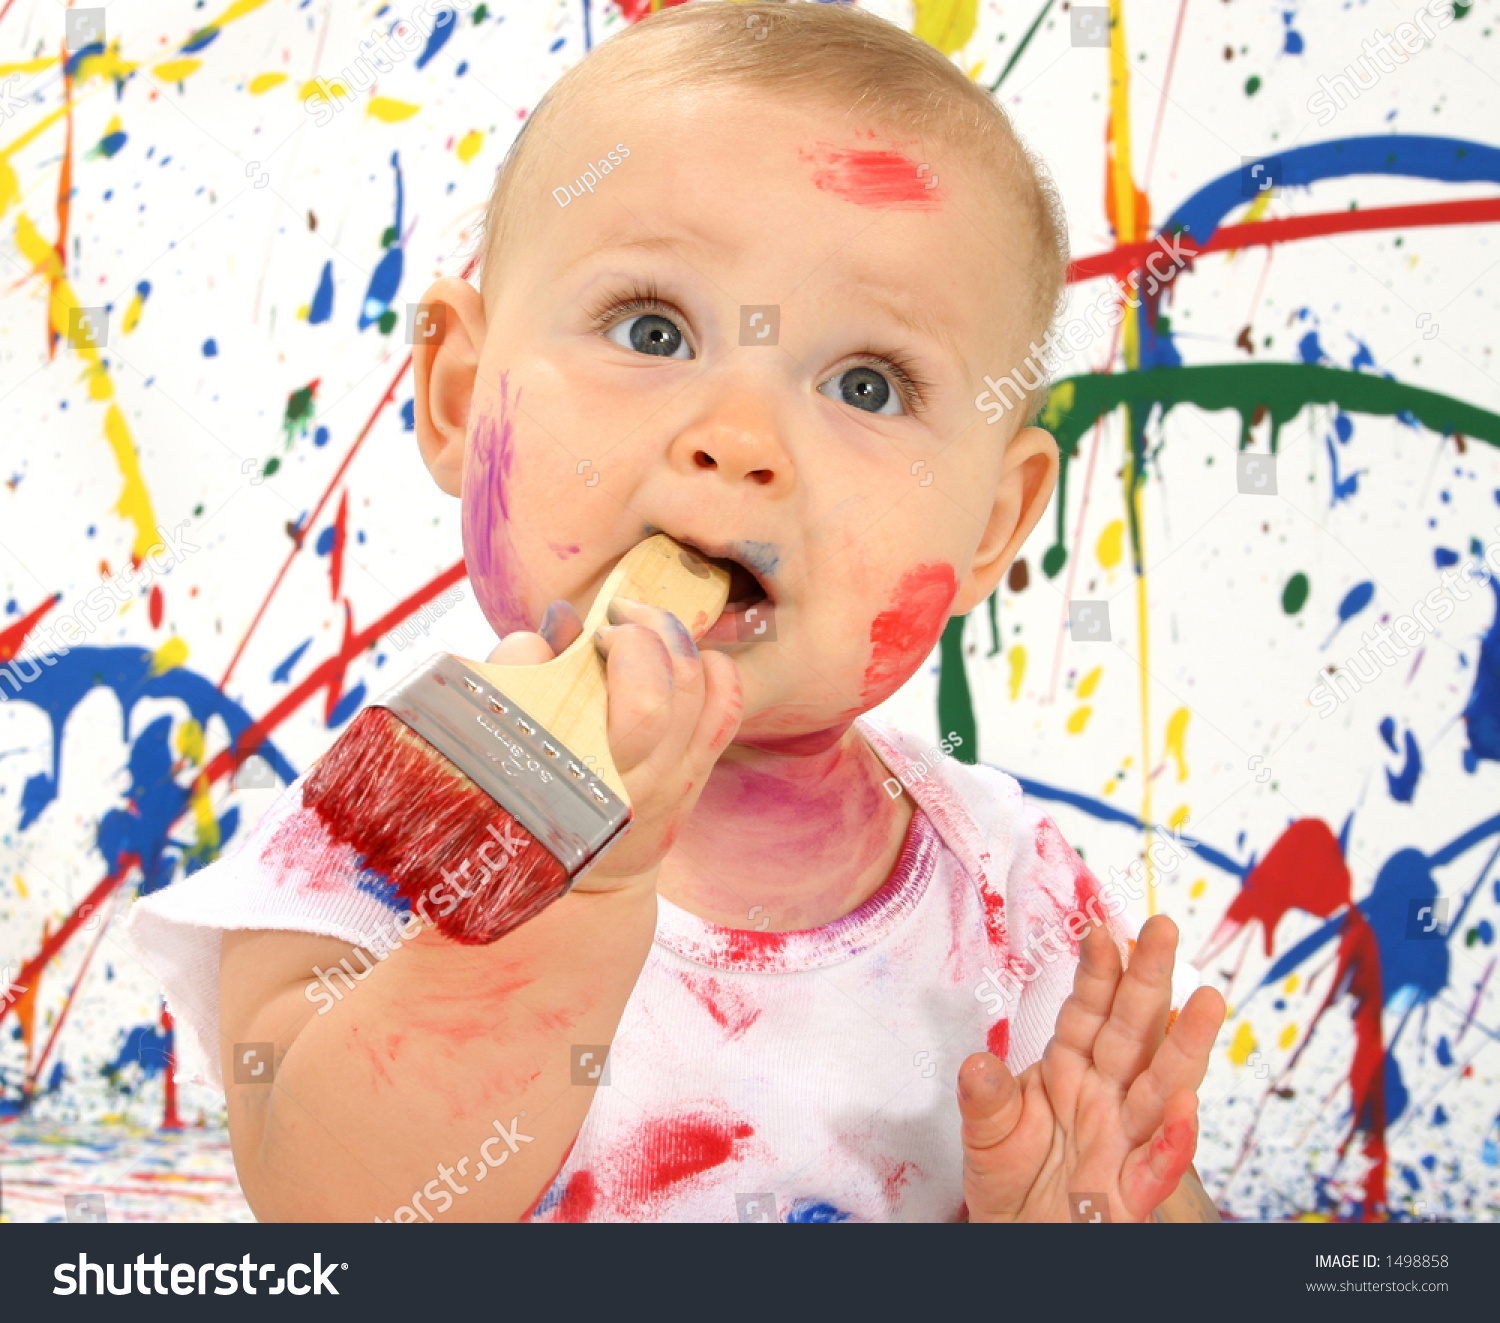 Beautiful Baby Covered In Bright Paint With Paint Brush In Mouth Stock